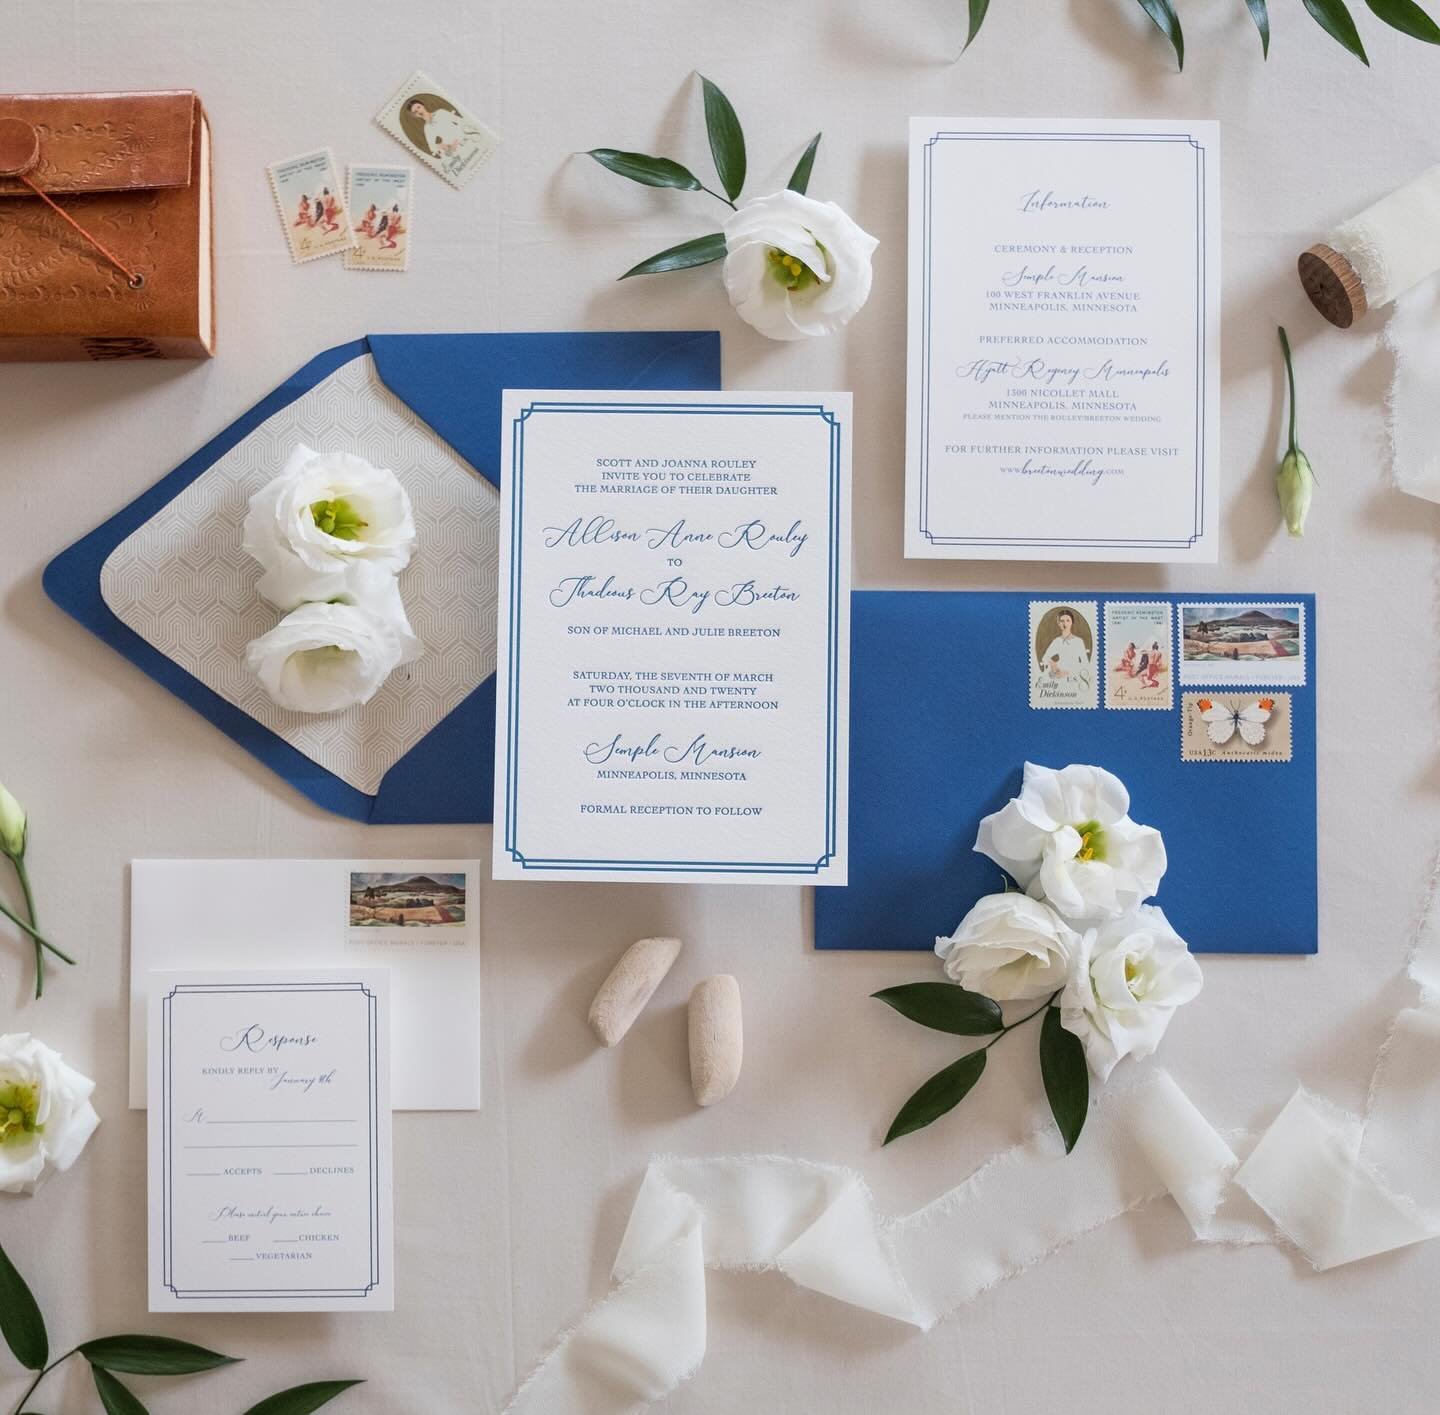 The Allison Suite. The most popular invitation set in my semi-custom collection. She&rsquo;s timeless, elegant and can be customized in so many ways. Shown here in cobalt blue letterpress printing, with additional handmade paper liner. Gorg!
.
.
.
#w